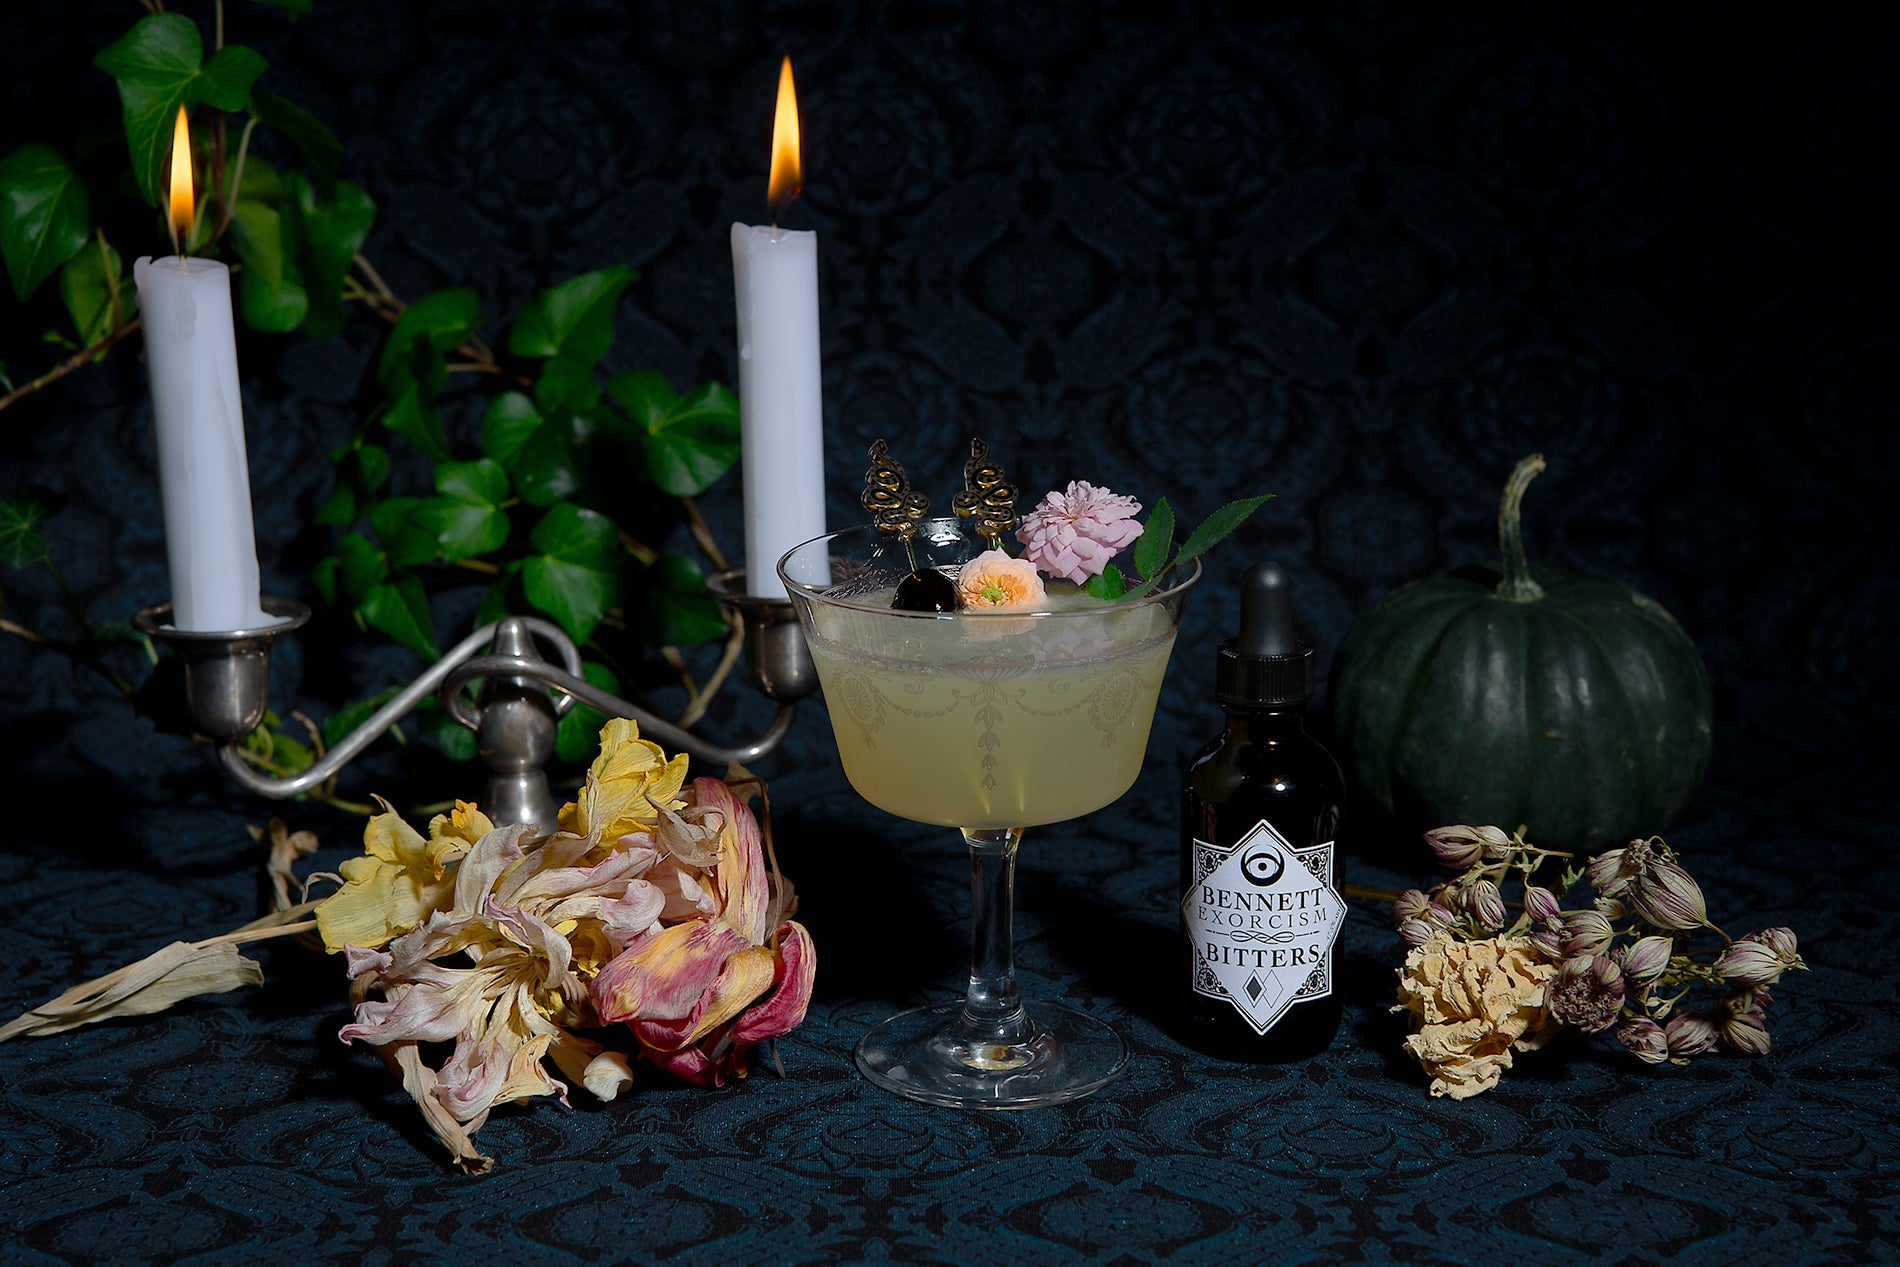 Bottle of Exorcism Bitters next to Corpse Reviver #2  cocktail in a moody setting with candles, a dark green pumpkin, and botanicals.